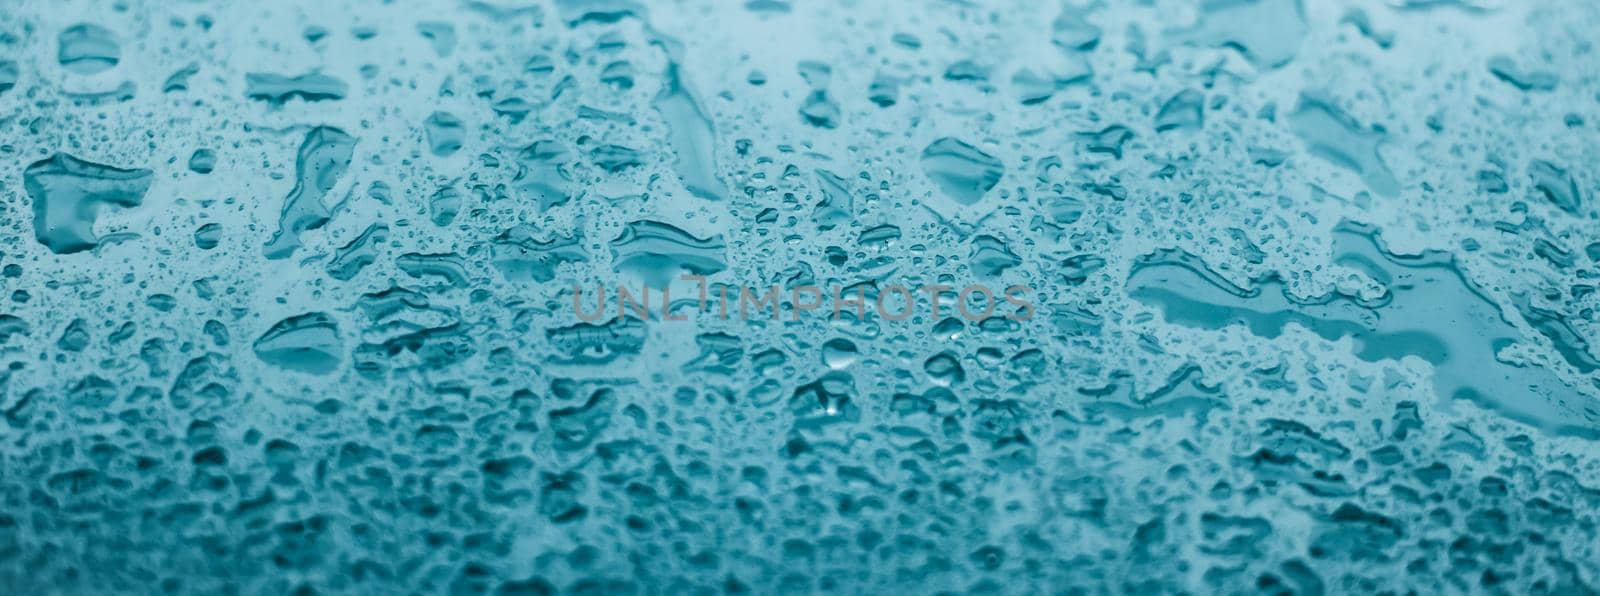 Water texture abstract background, aqua drops on turquoise glass as science macro element, rainy weather and nature surface art backdrop for environmental brand design by Anneleven